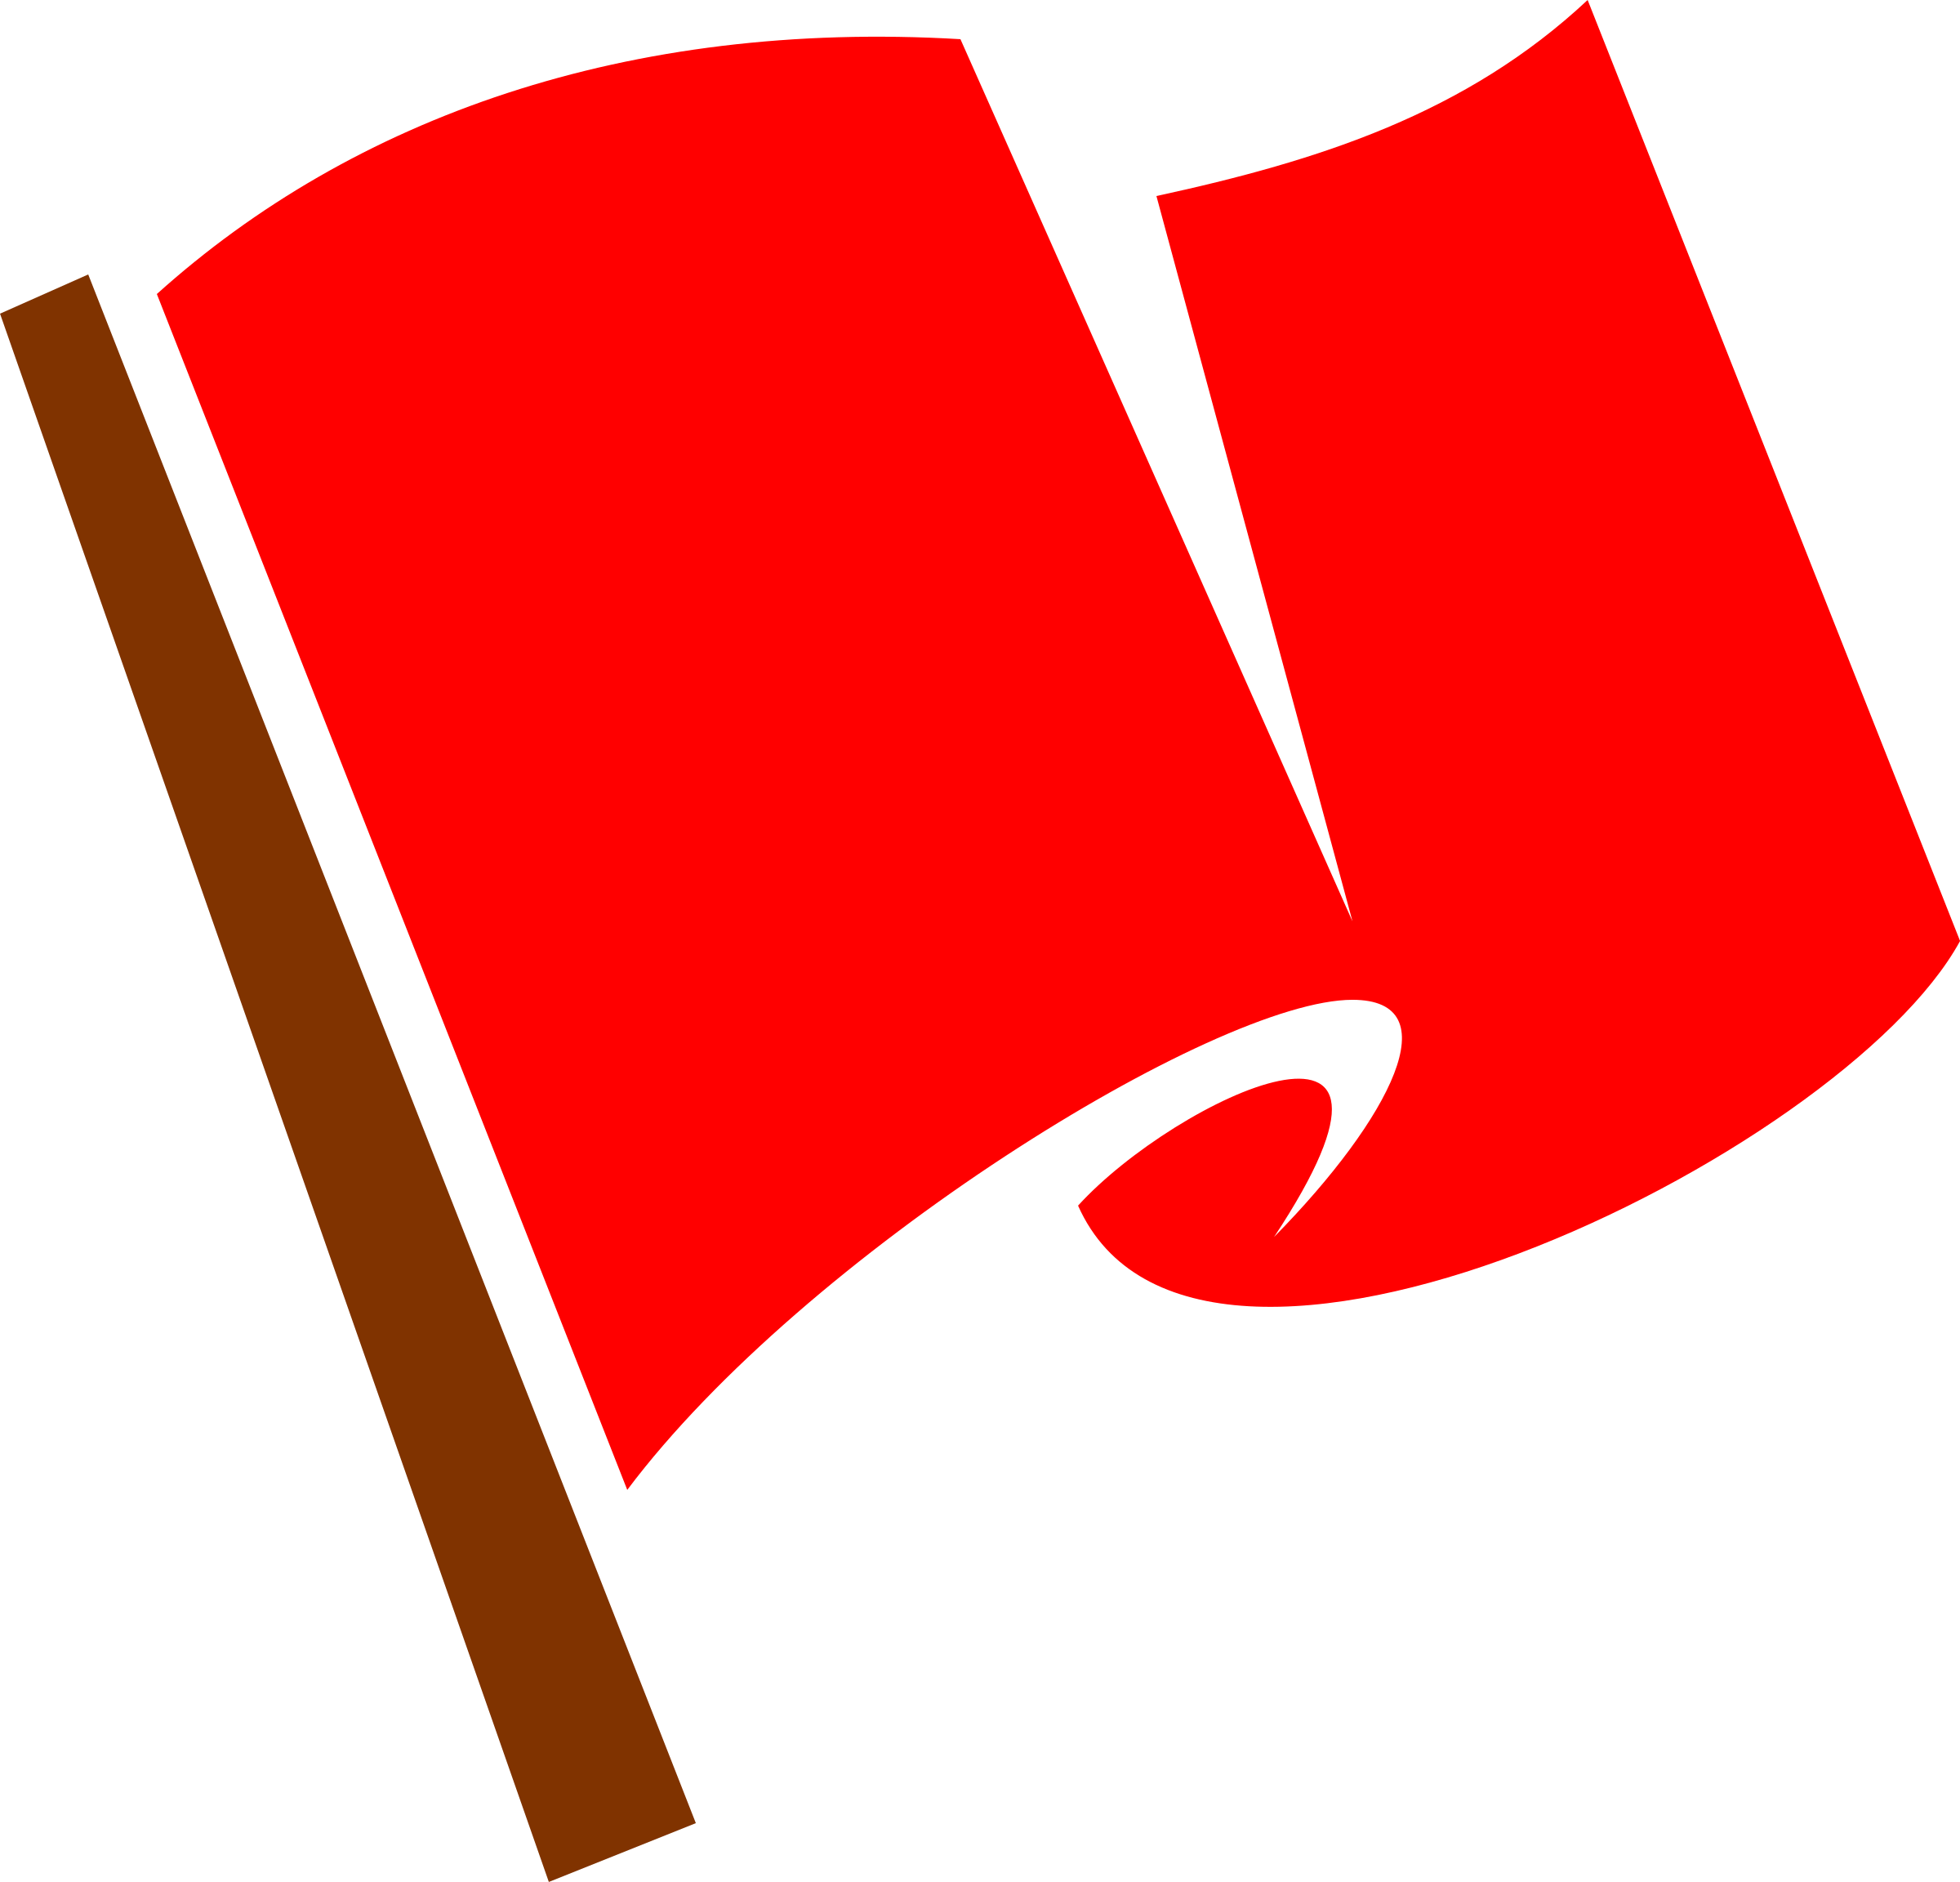 small red flag clipart - photo #23